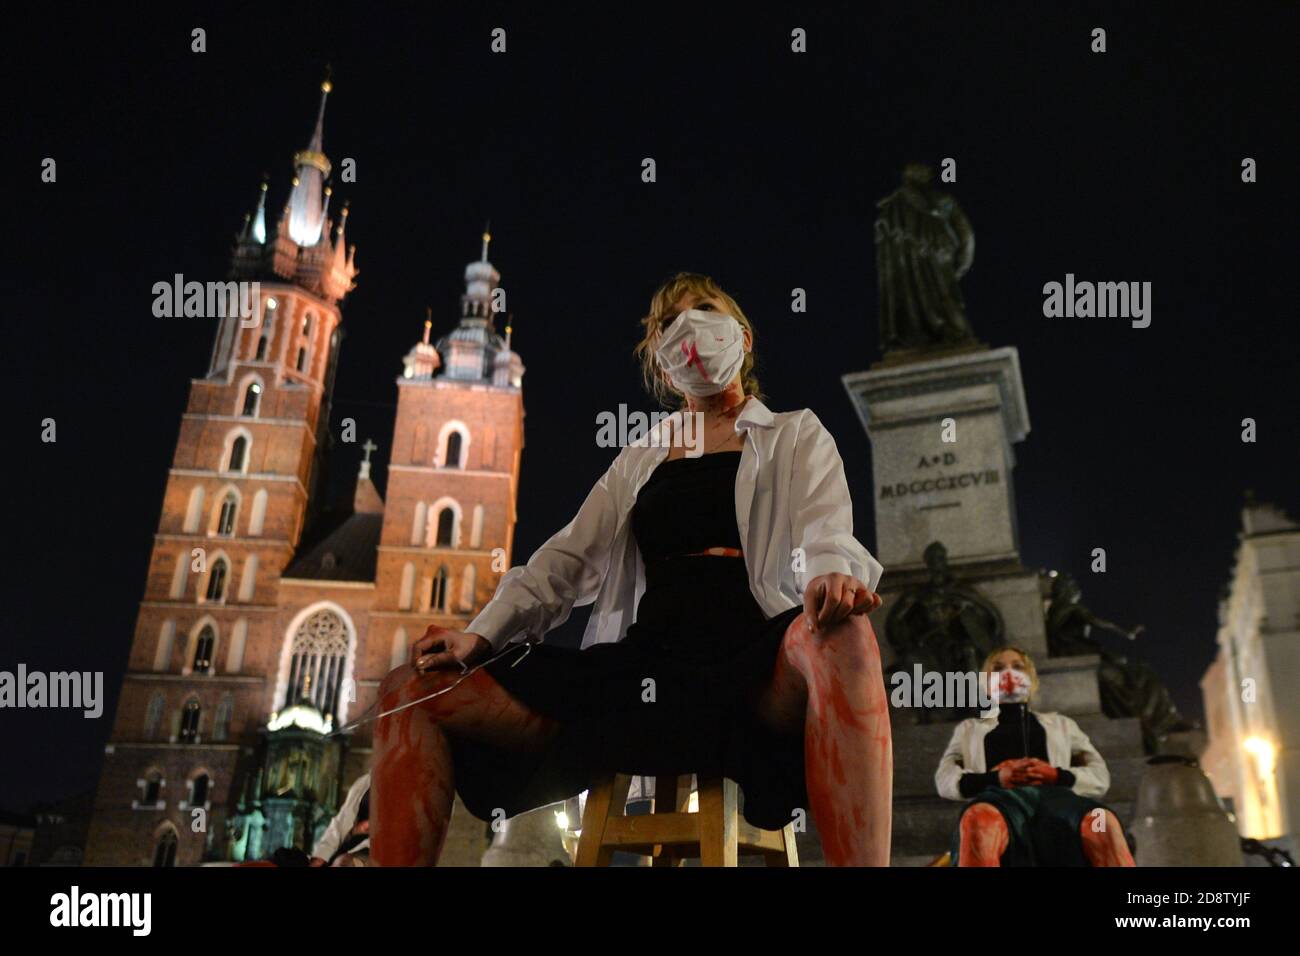 Krakow, Poland. 1 November, 2020. Pro-Choice activists during a protest next to Adam Mickiewicz monument in Krakow's Main Market Square. Pro-Choice and women's rights activists and their supporters organised on Sunday evening another anti-government protest in Krakow to express their anger at the Supreme Court ruling in relation to abortion laws.. Credit: ASWphoto/Alamy Live News Stock Photo